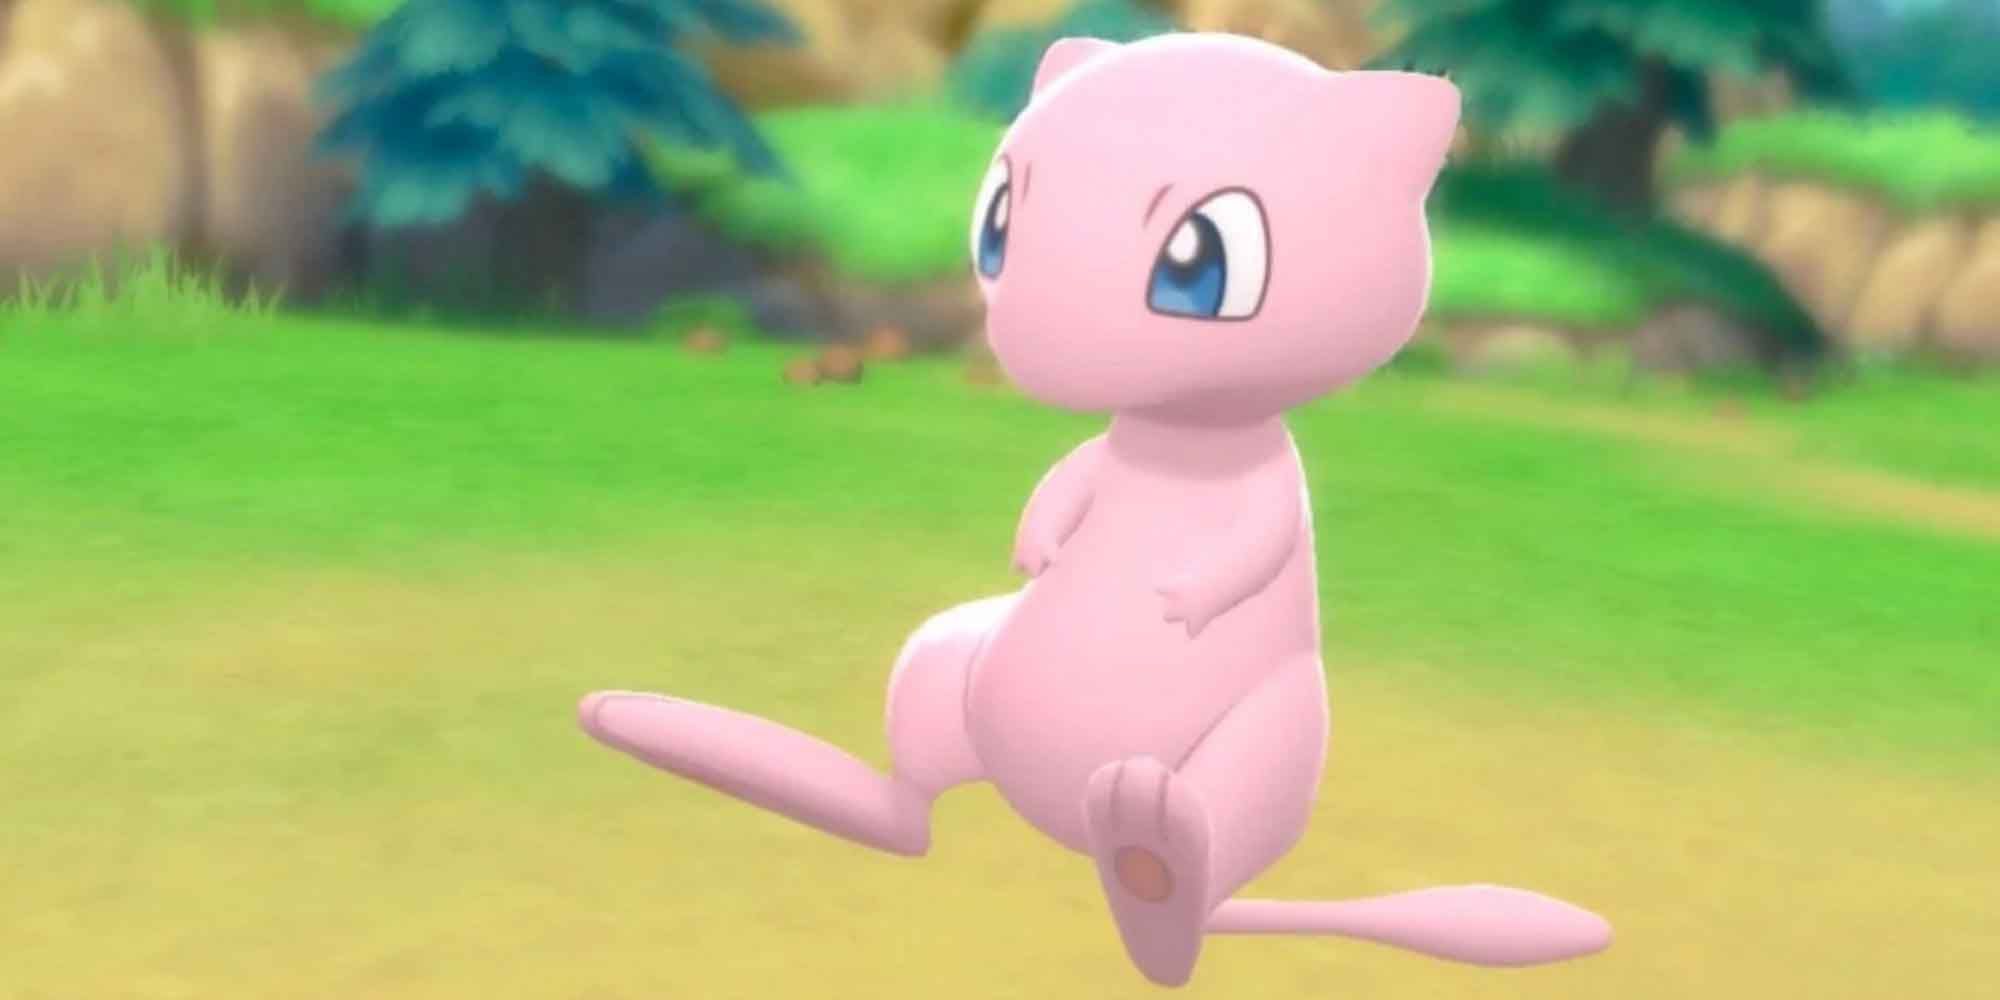 The cute and powerful Pokemon, Mew